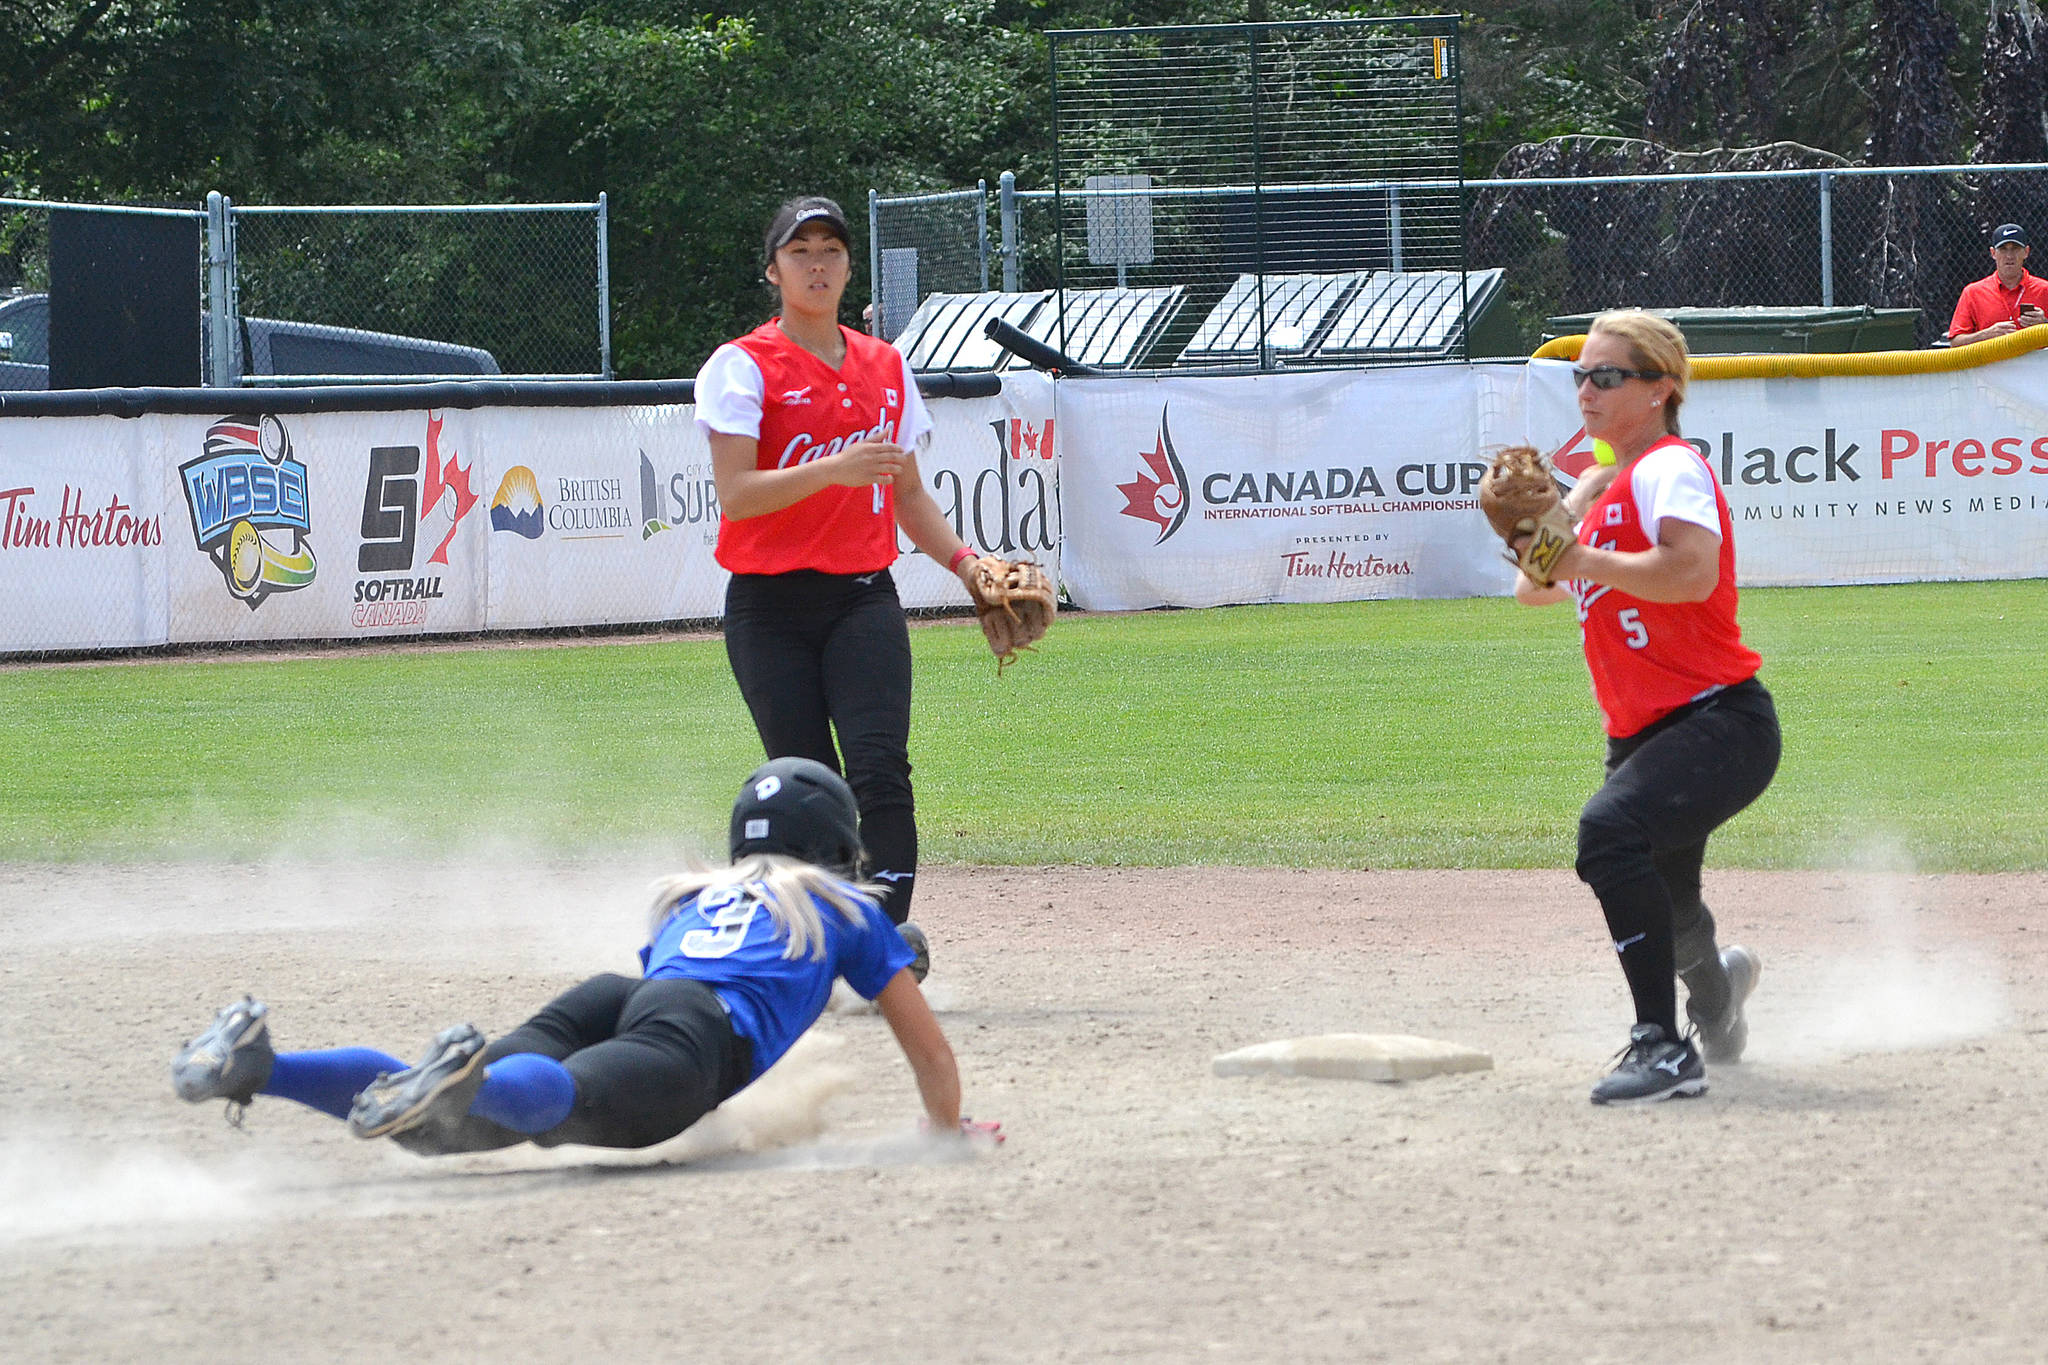 Team Canada infielders Janet Leung (left) and Joey Lye make a play at second base during Canada’s game against Triple Crown Colorado on Friday afternoon at Softball City. (Nick Greenizan photo)